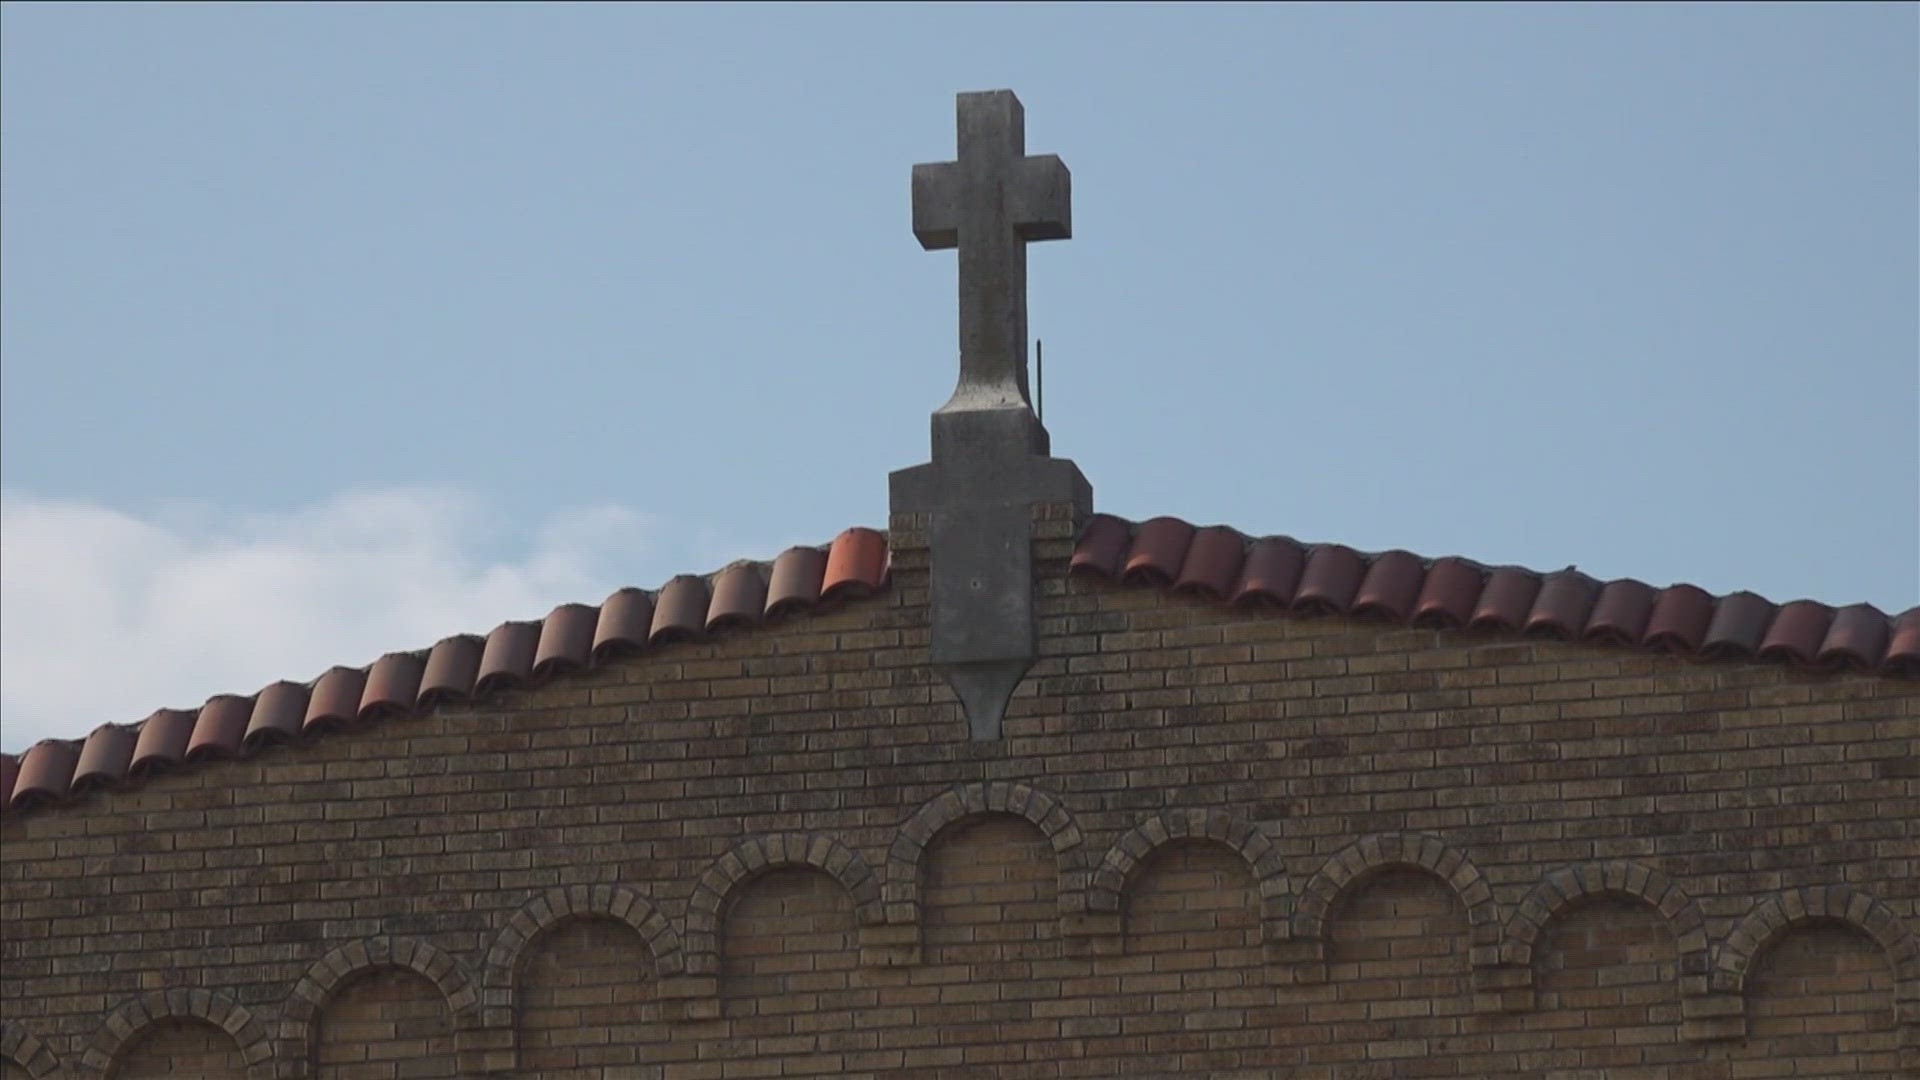 A Memphis neighborhood has over 100 signatures to lower the volume of bells coming from a Catholic Church.